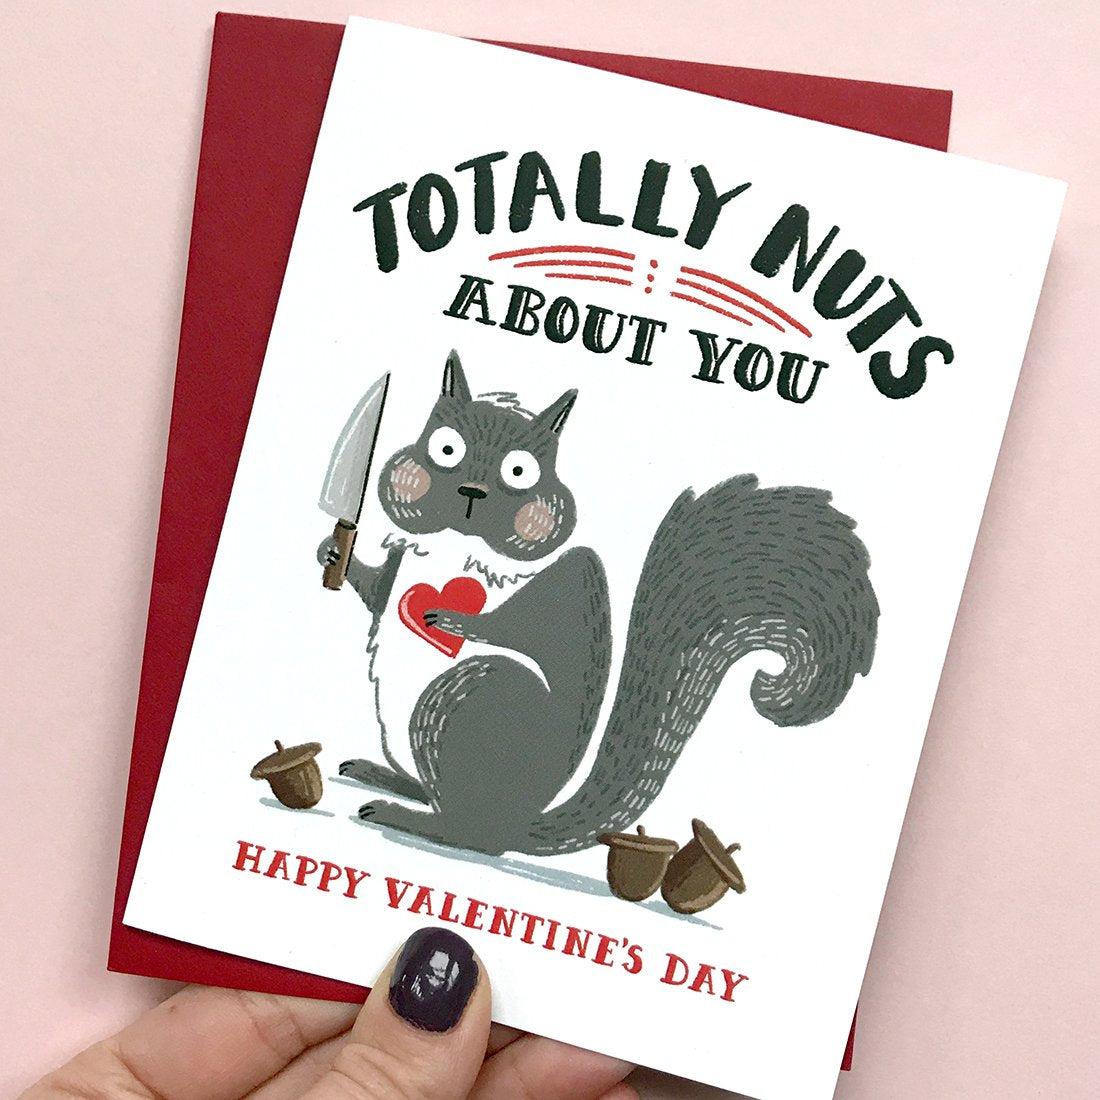 Totally Nuts About You - Valentine's Day Card